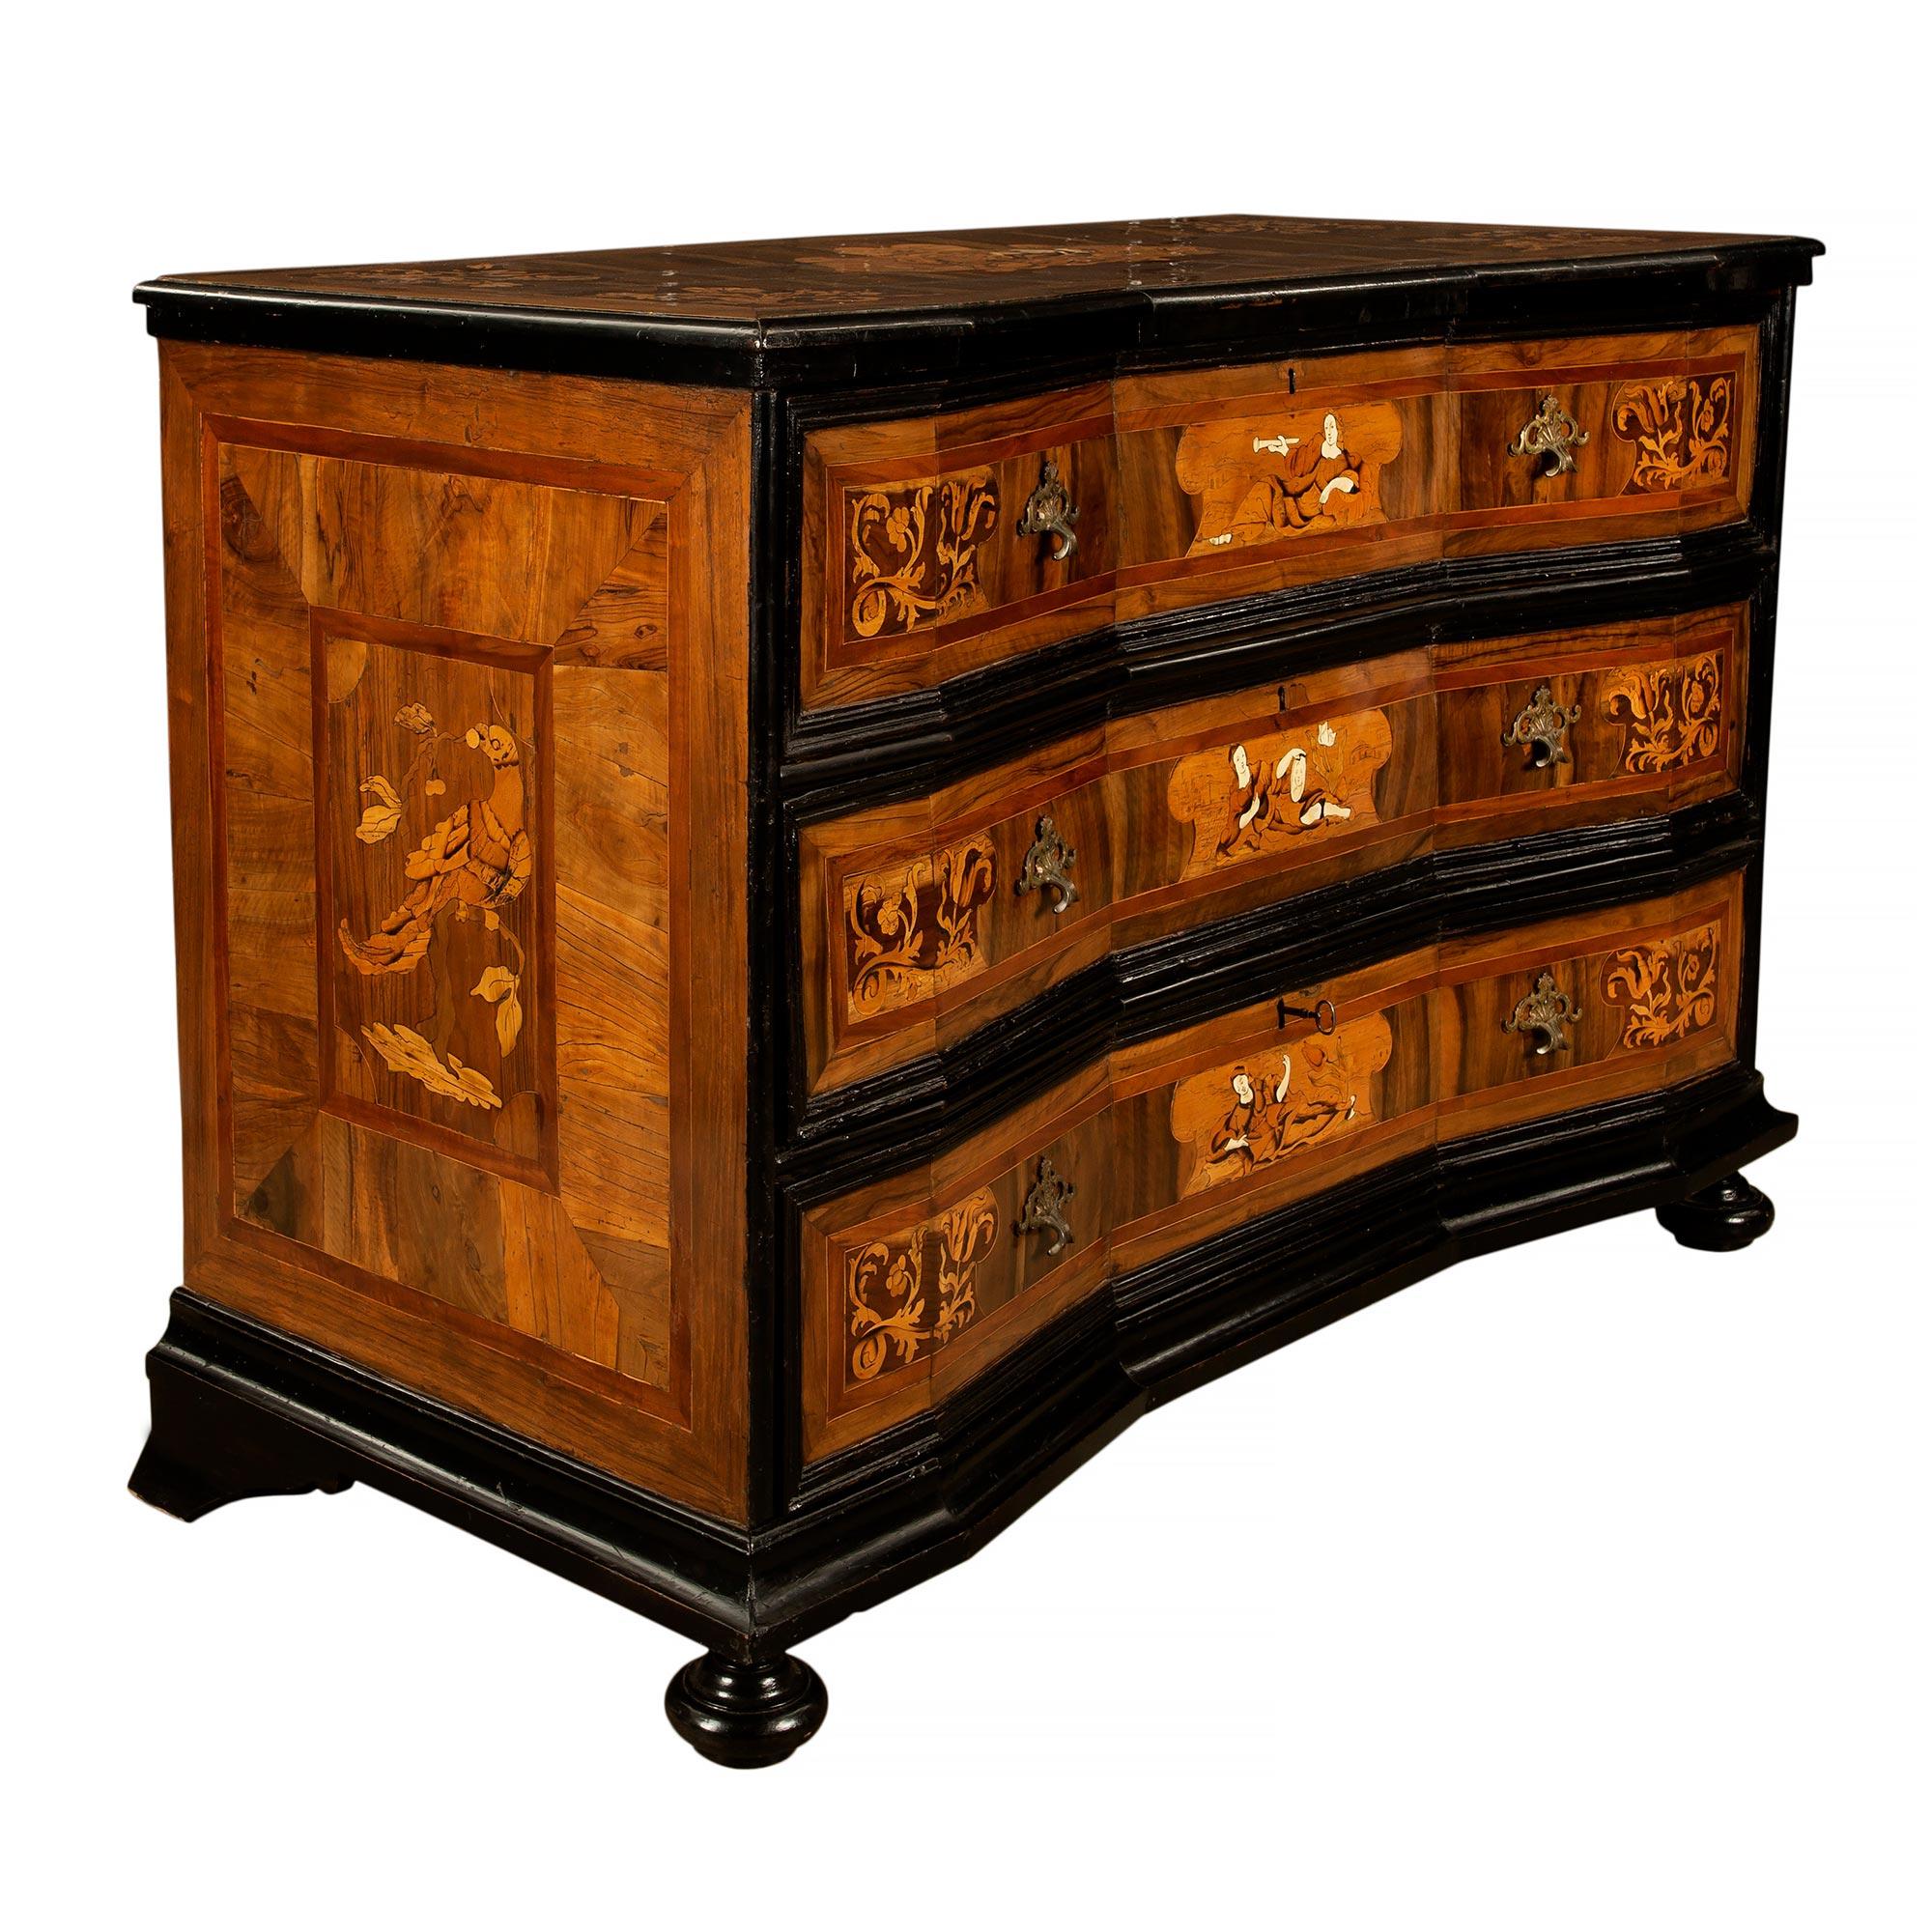 Italian Early 18th Century Inlaid Commode from the Lombardi Region In Good Condition For Sale In West Palm Beach, FL